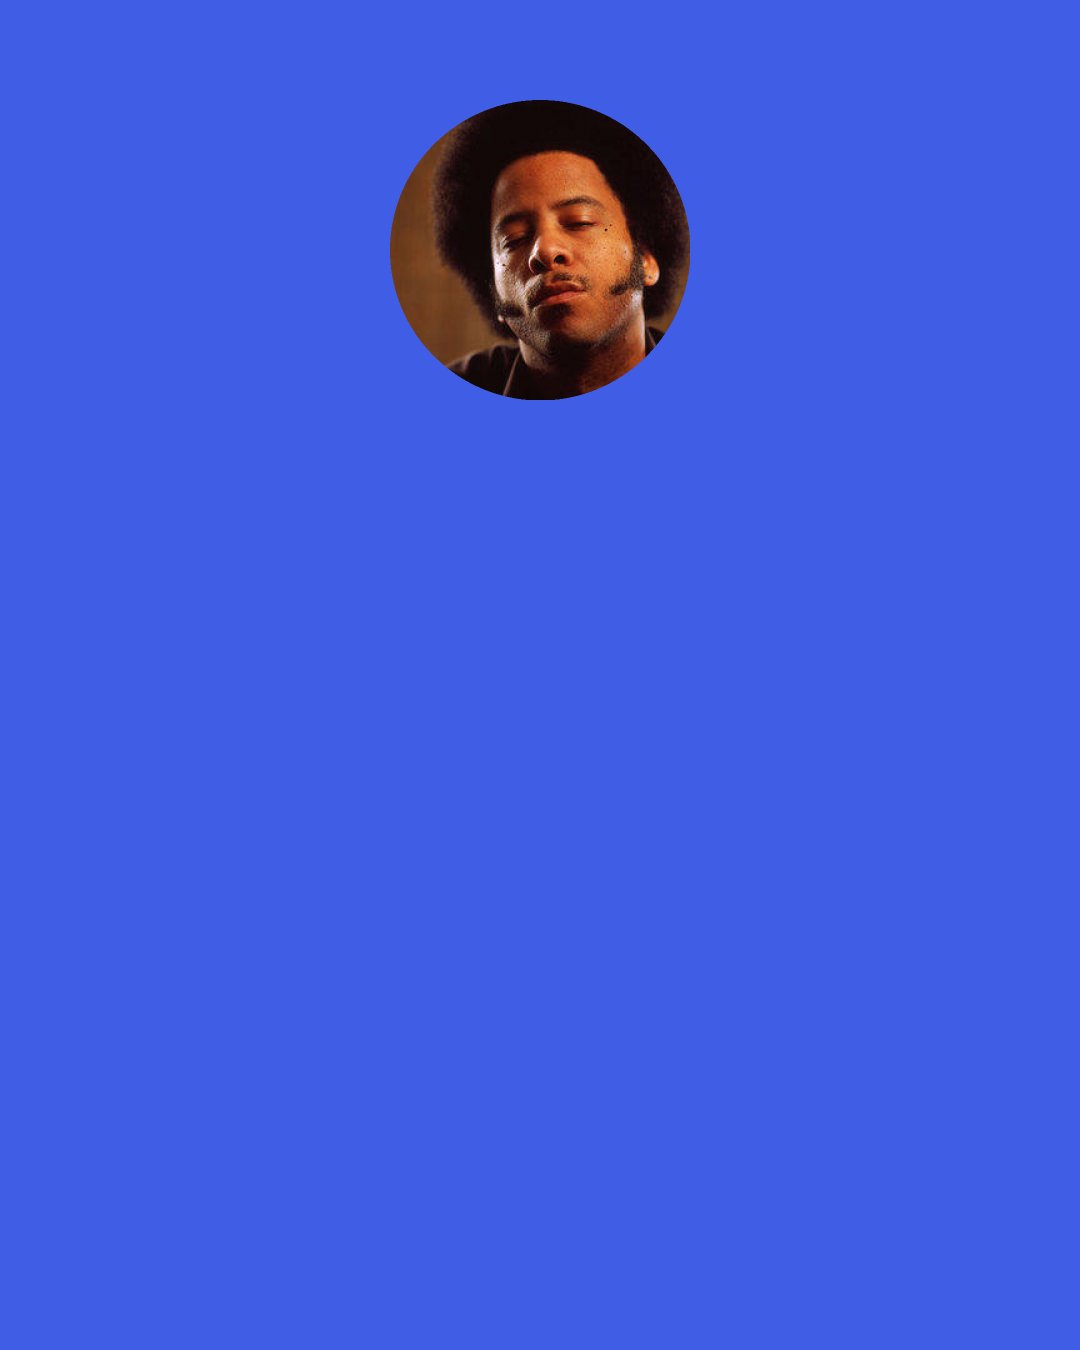 Boots Riley: When I was five years old, me and my cousin got into a fistfight because when "That's the Way (I Like It)" came on the radio, he said, "That's my song," and I said, "No, that's my song."